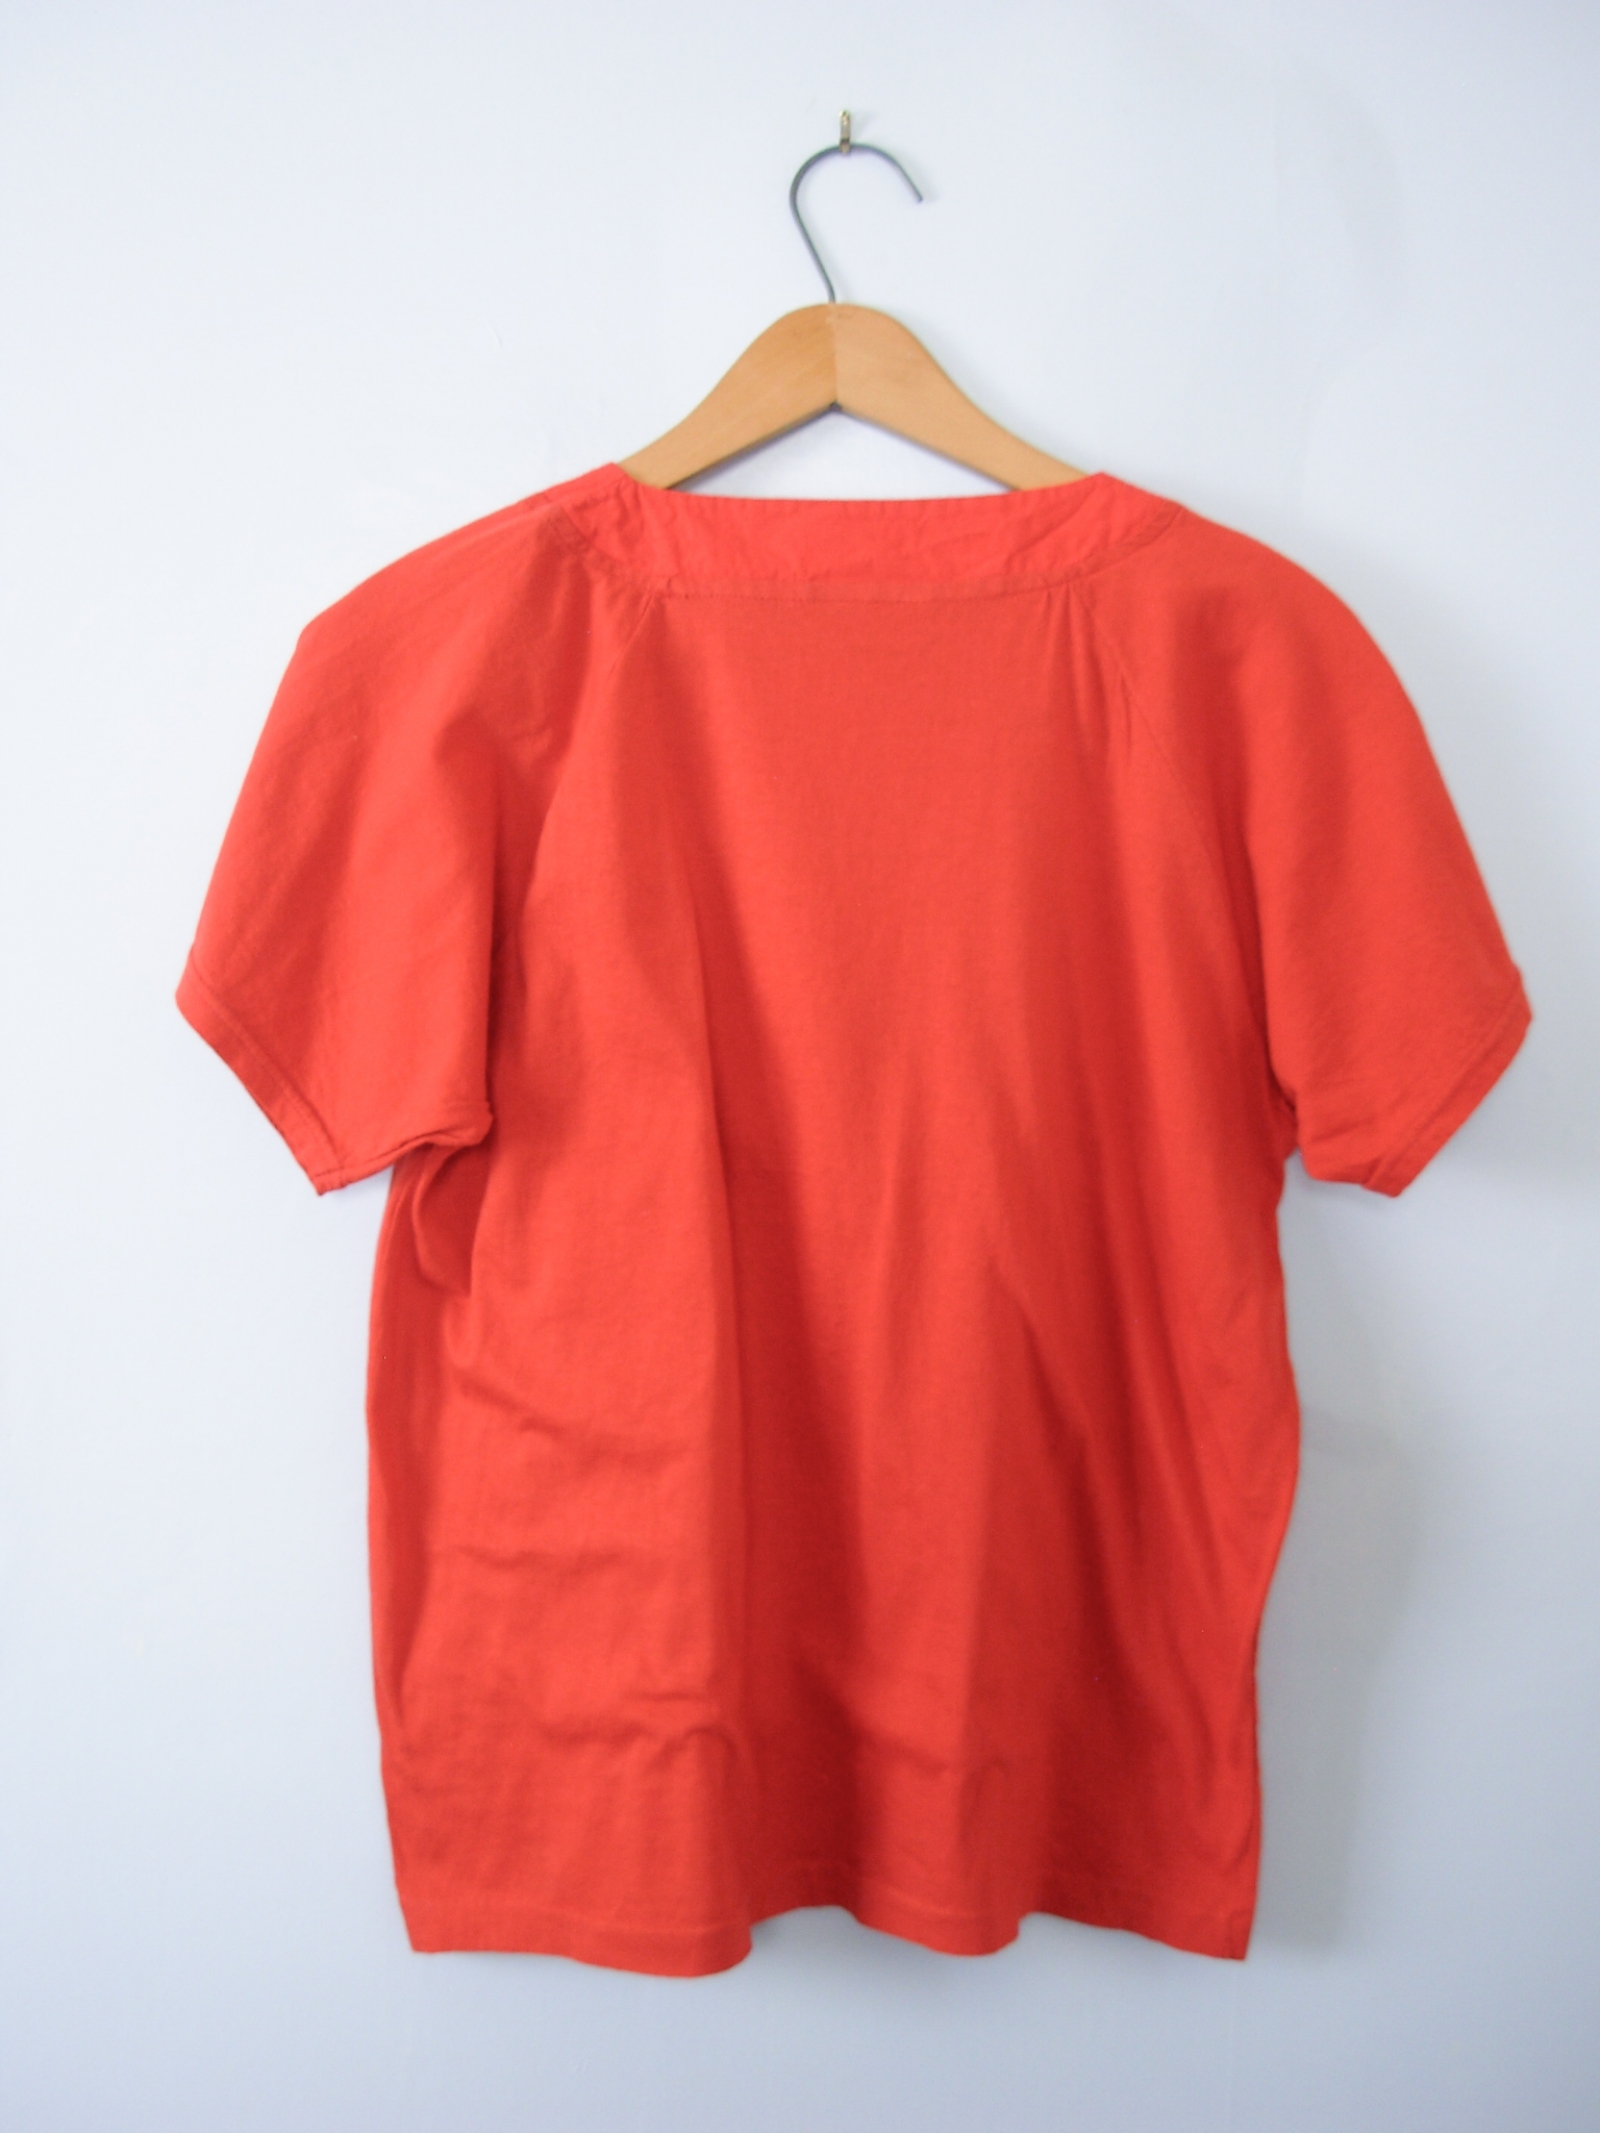 Vintage 80's plain red henley tee shirt with pocket, women's size ...